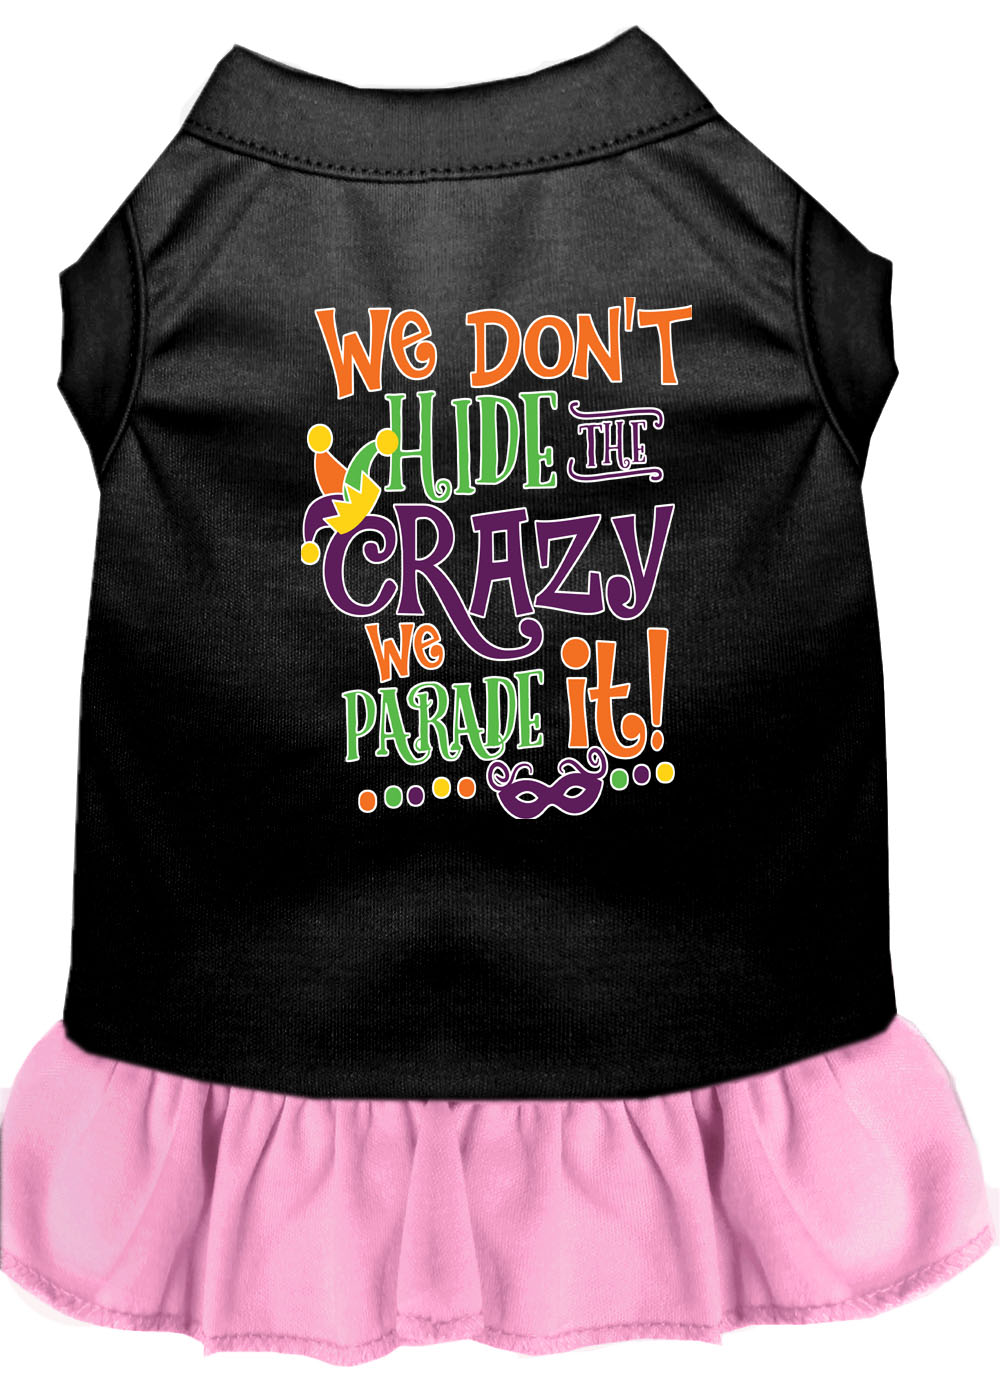 We Don't Hide the Crazy Screen Print Mardi Gras Dog Dress Black with Light Pink XS